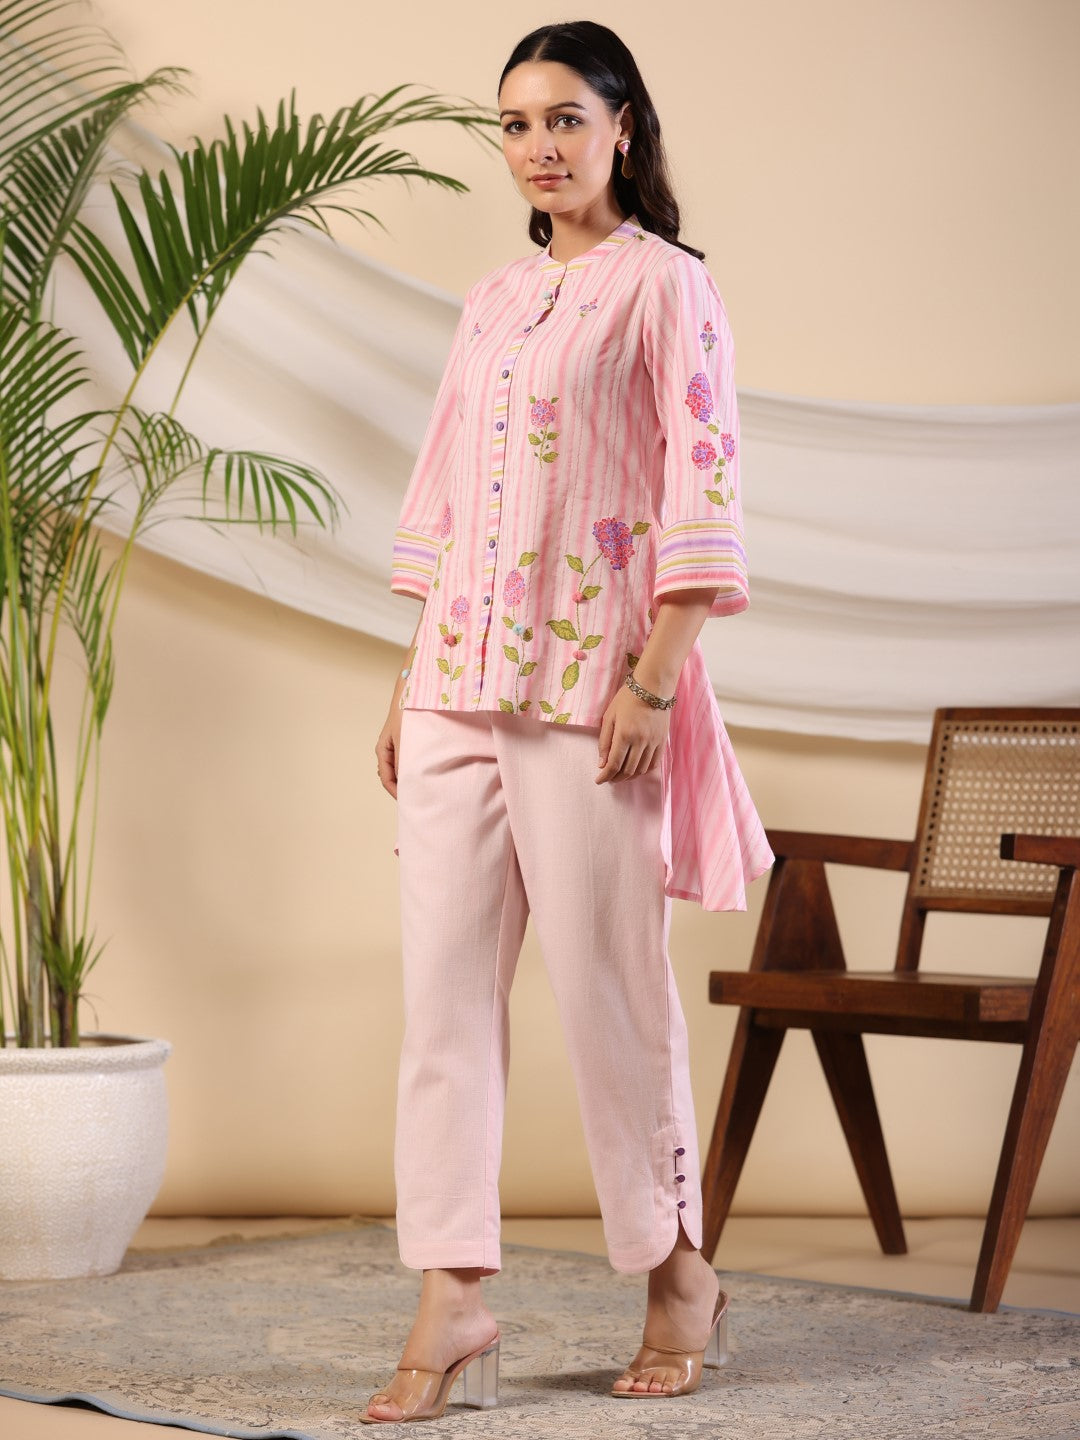 Buy Women Clothing Sets online in India : Juniper Fashion